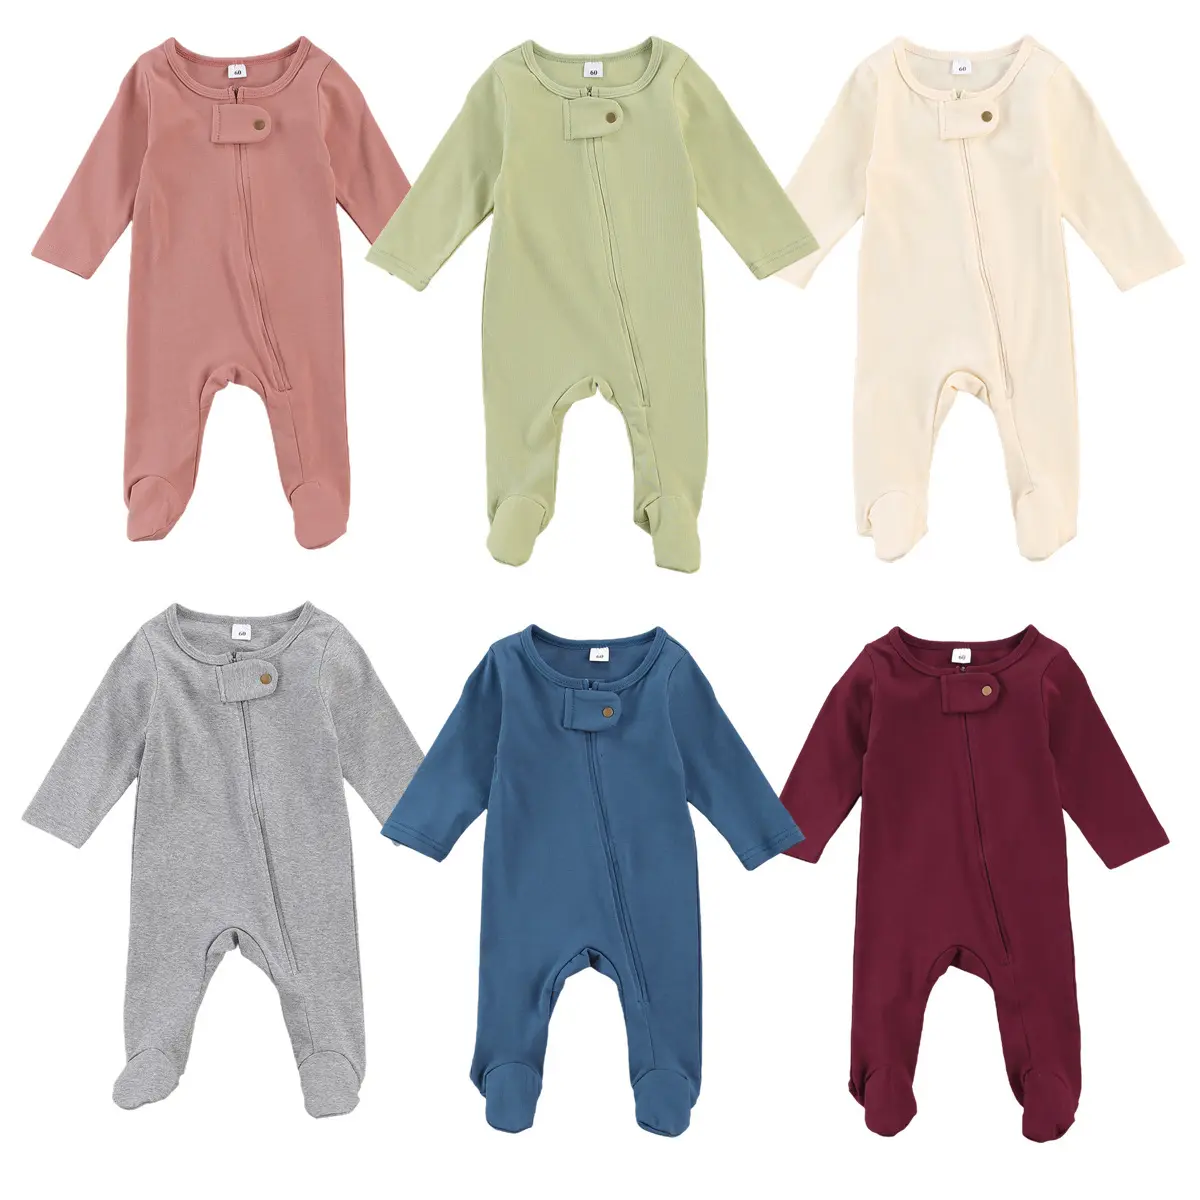 Organic Bamboo Fiber Sleeper Long Sleeves With Zipper Baby Rompers Basic Baby Clothes